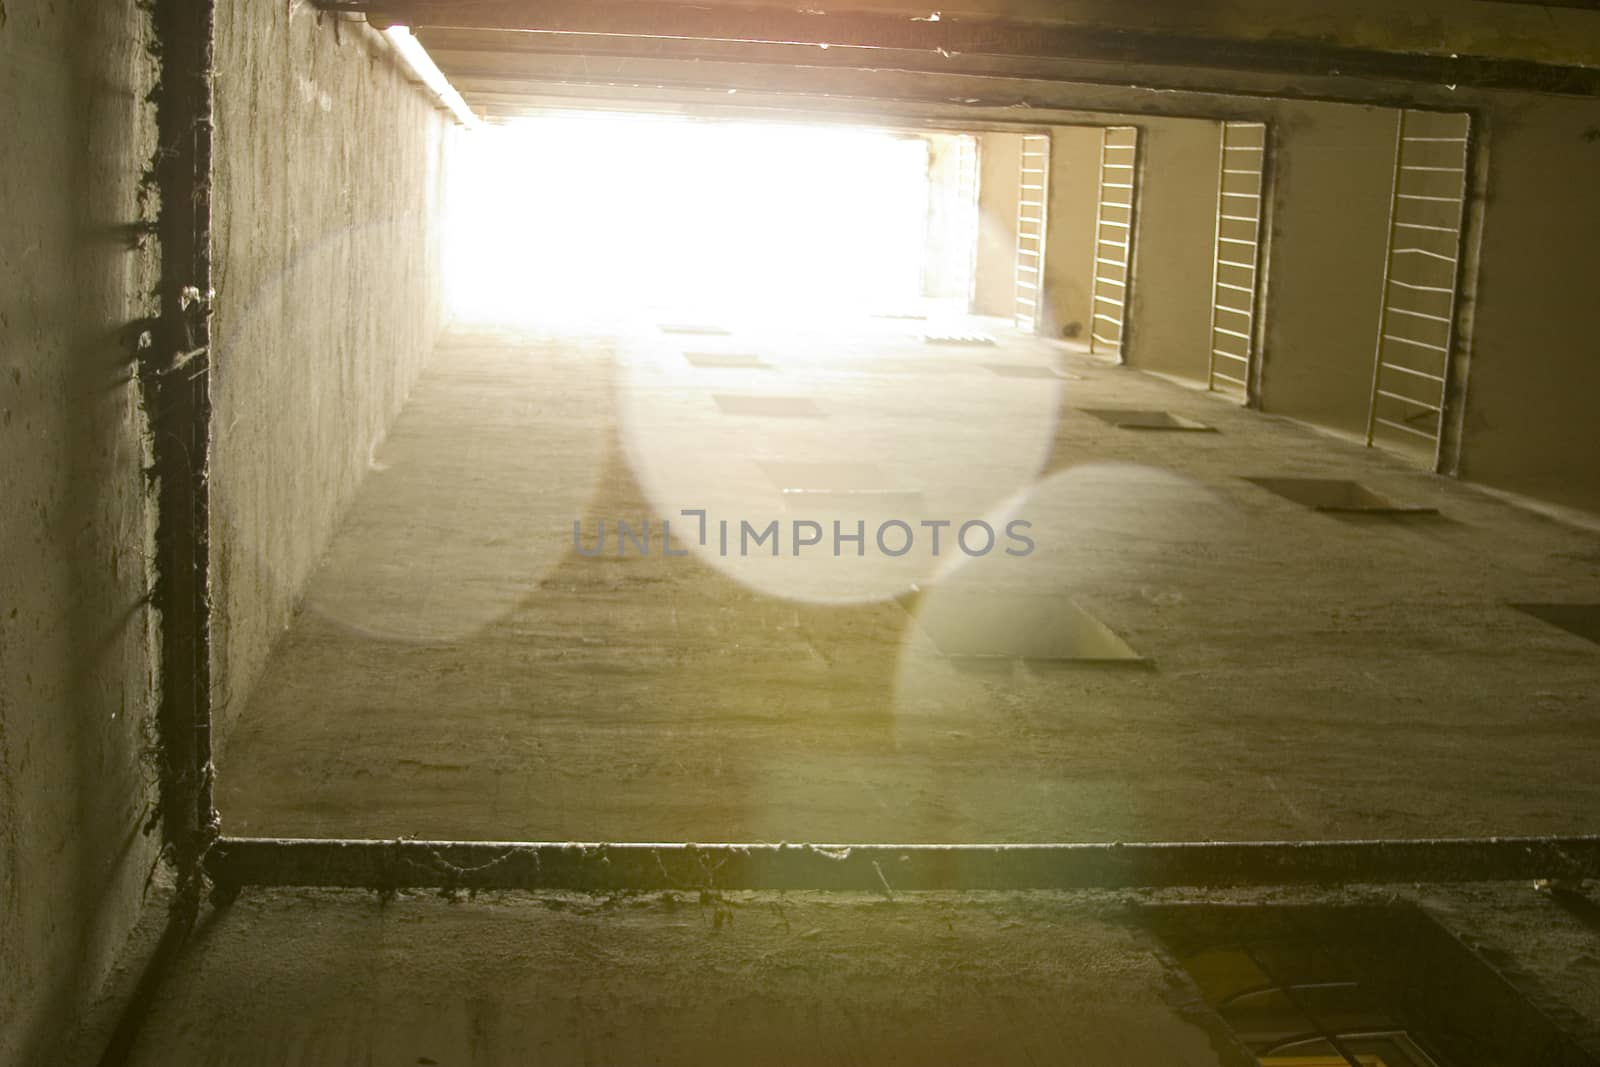 Perspective inside of a apartment block in Bucharest, architecture details, shot backlit with lens flare visible - Romania, common scenery in a EU capital ...